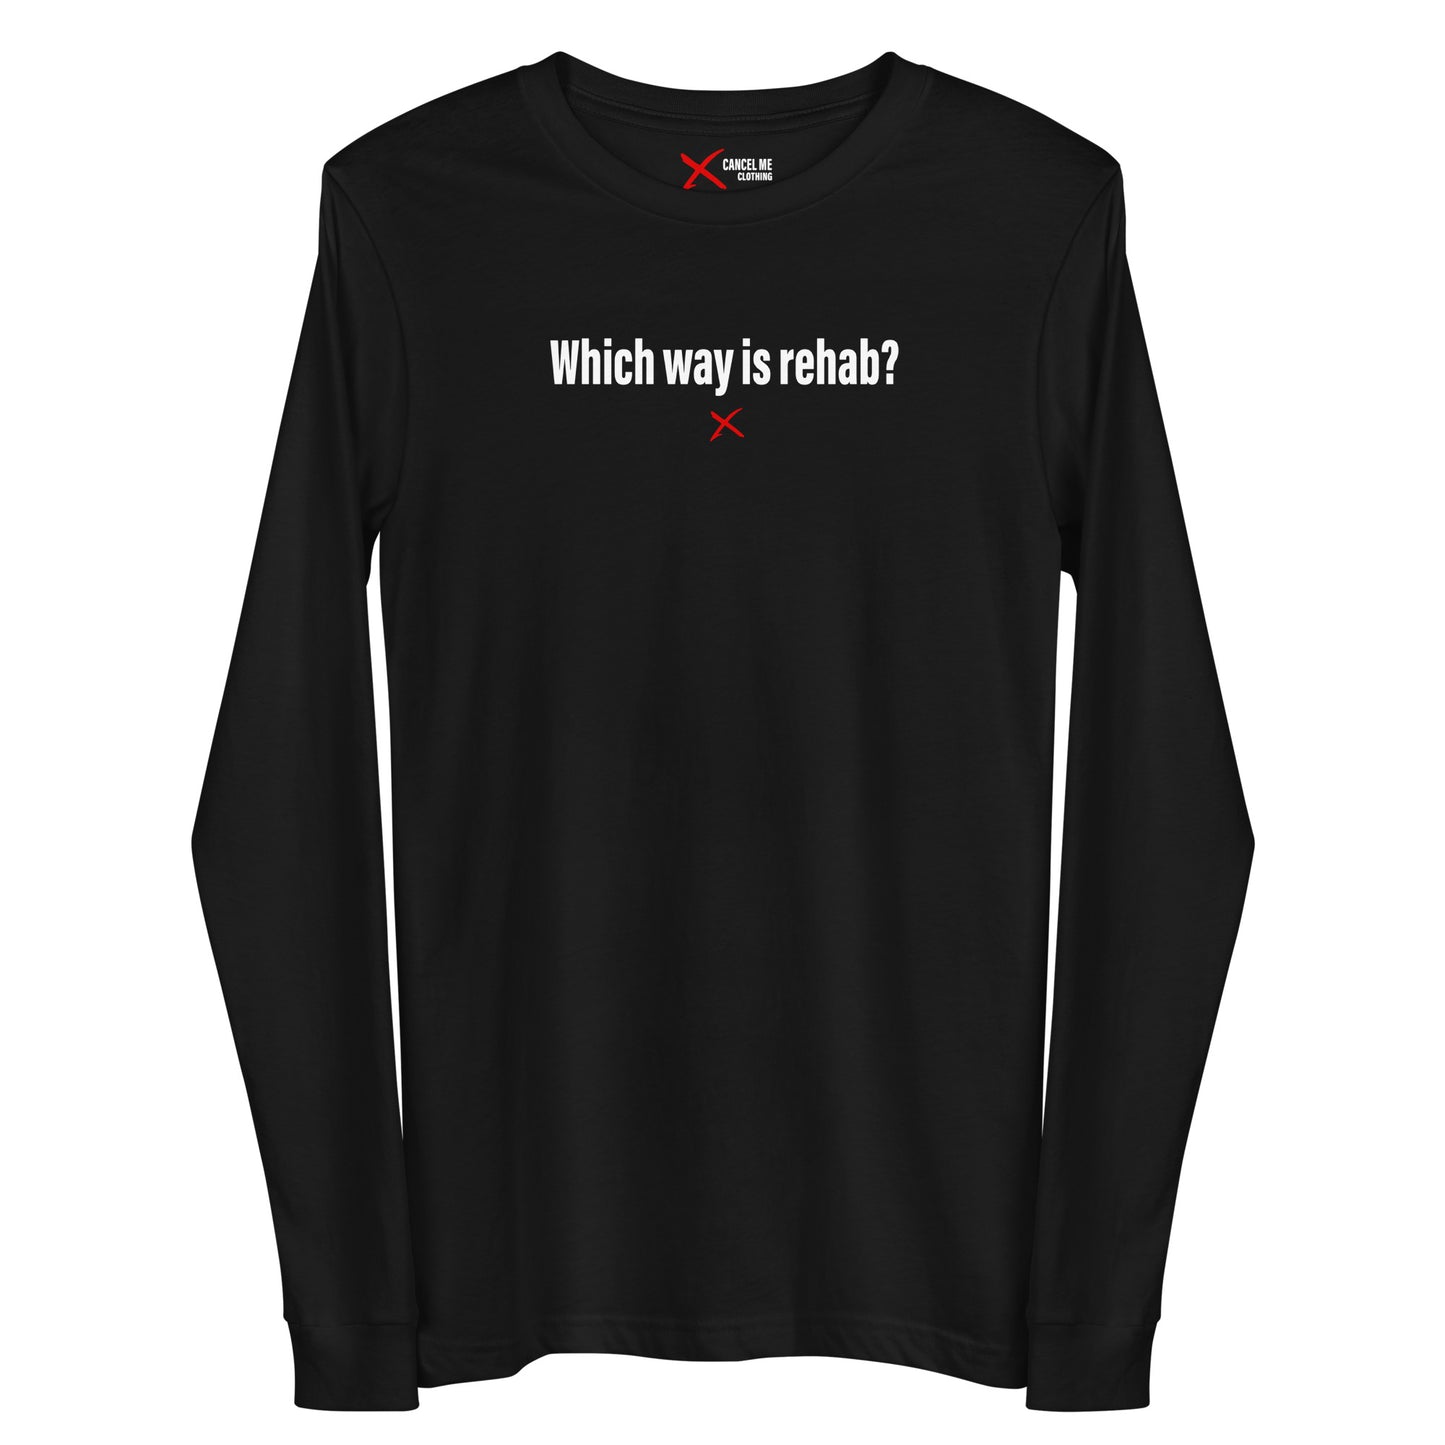 Which way is rehab? - Longsleeve